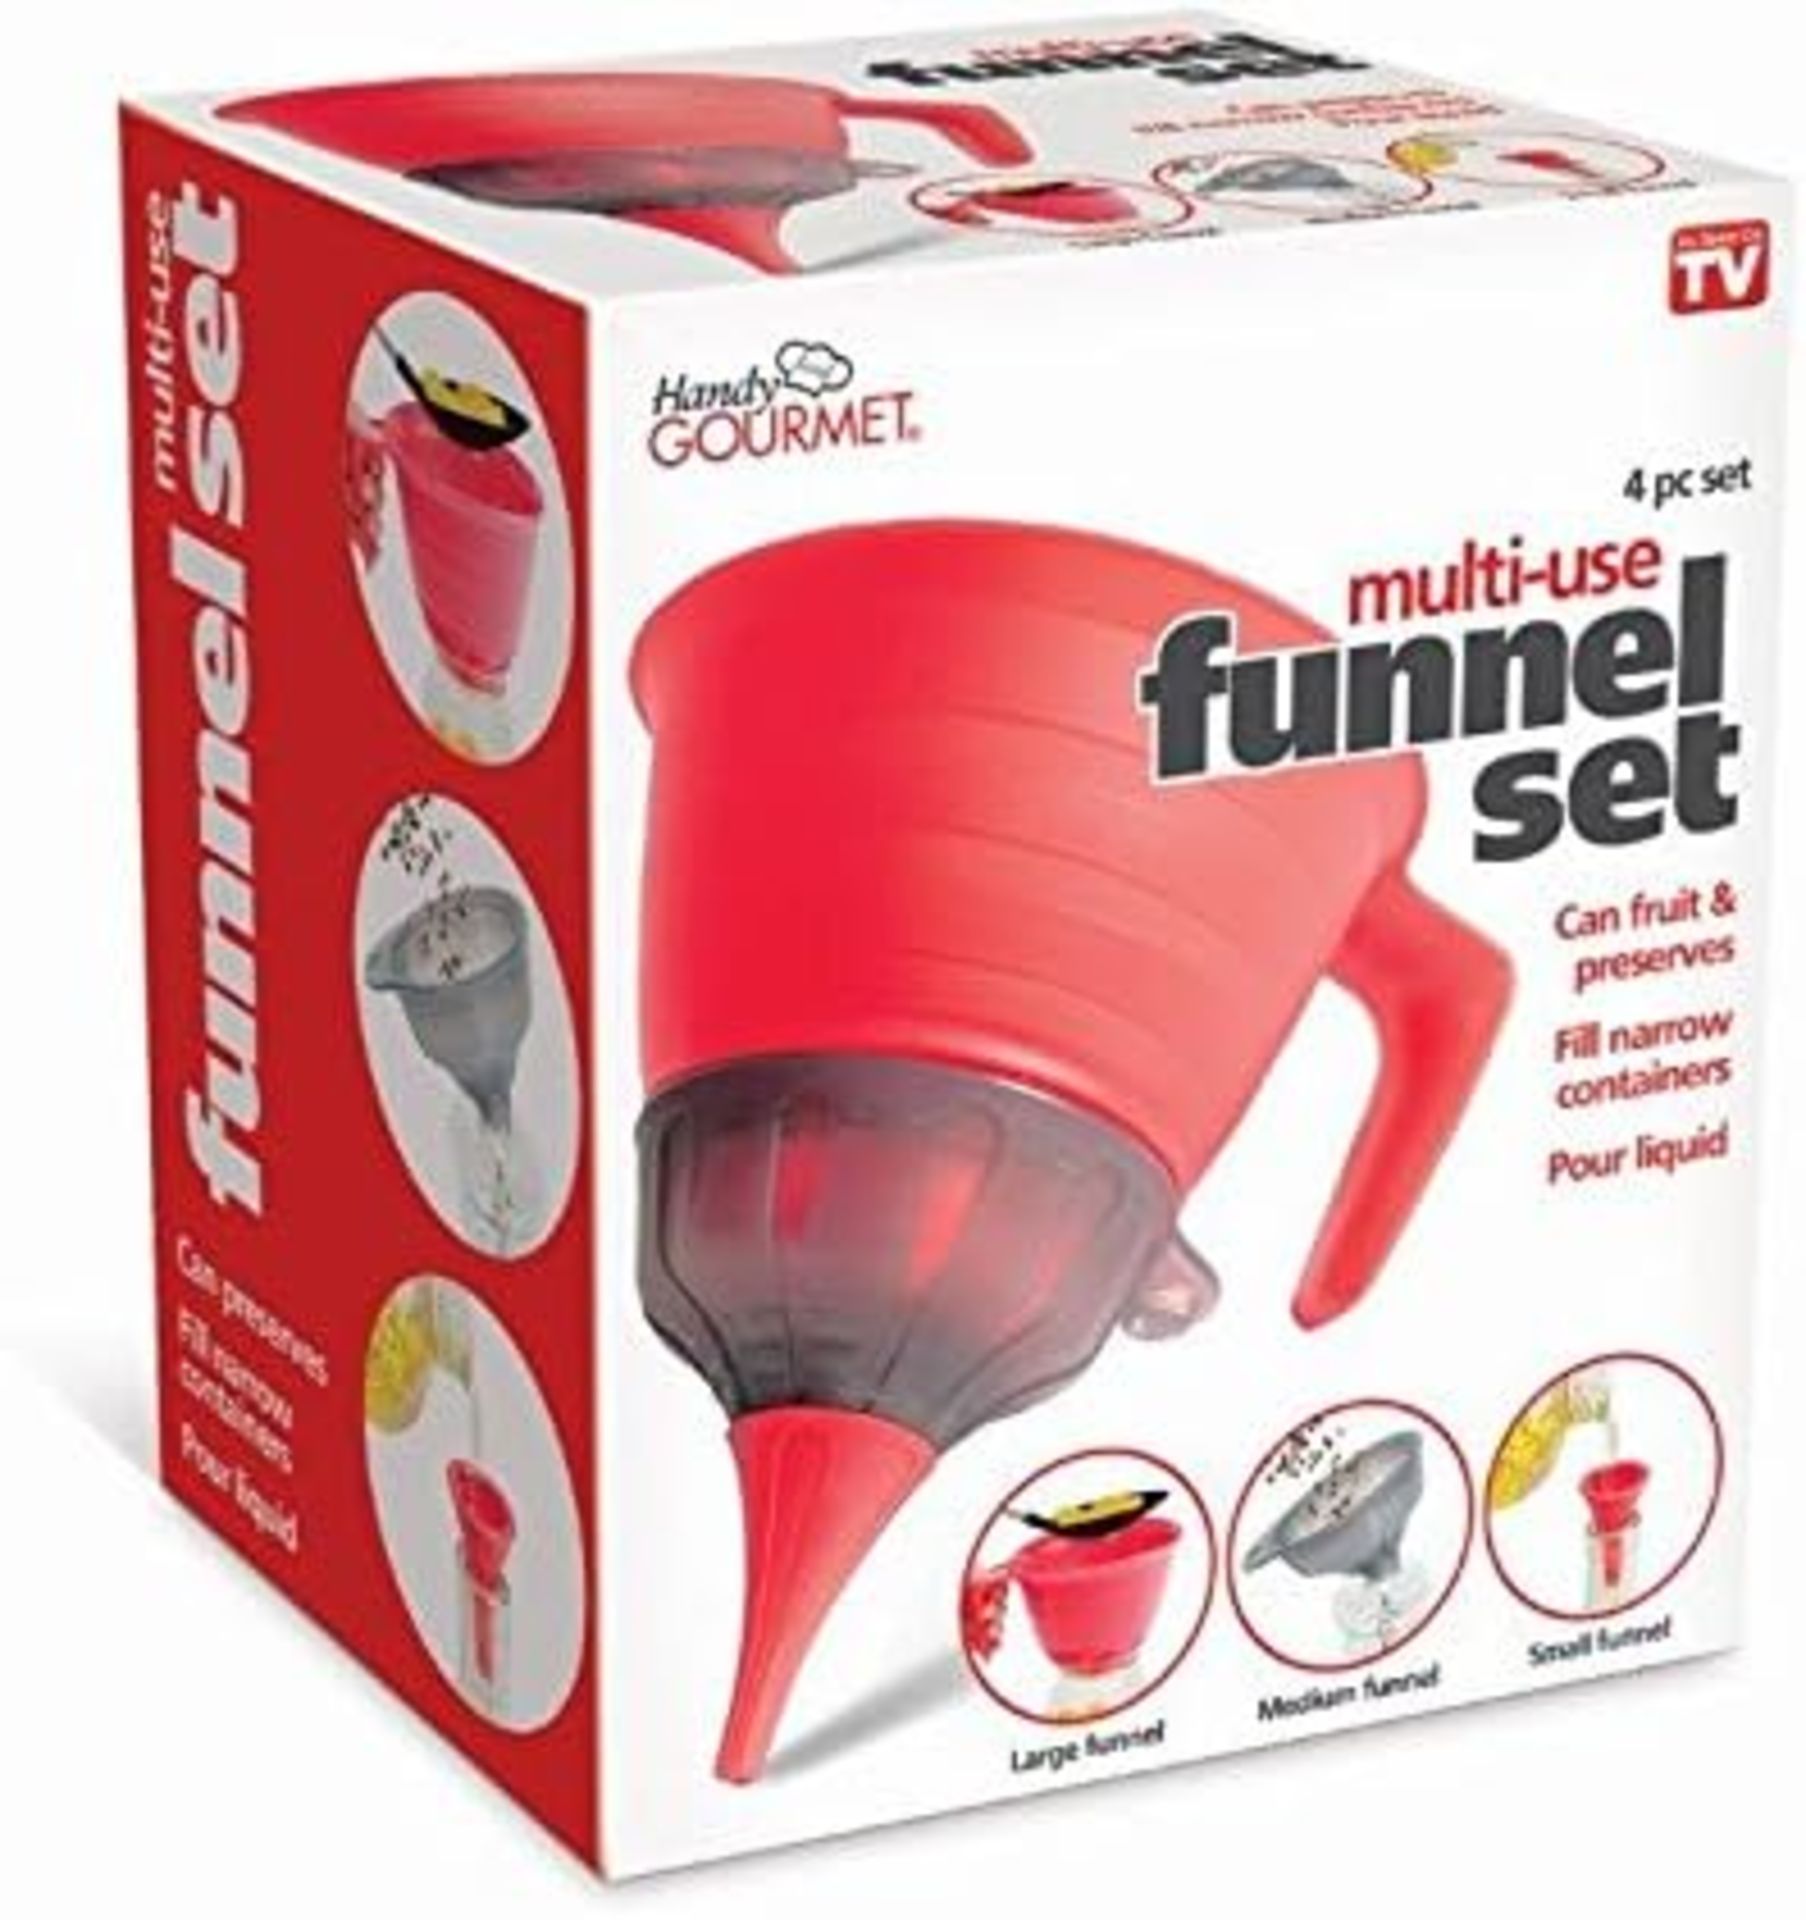 20 X BRAND NEW 3 IN 1 SMALL, MEDIUM, LARGE KITCHEN FUNNEL SET AND HANDLE FOOD LIQUID HANDY GOURMET